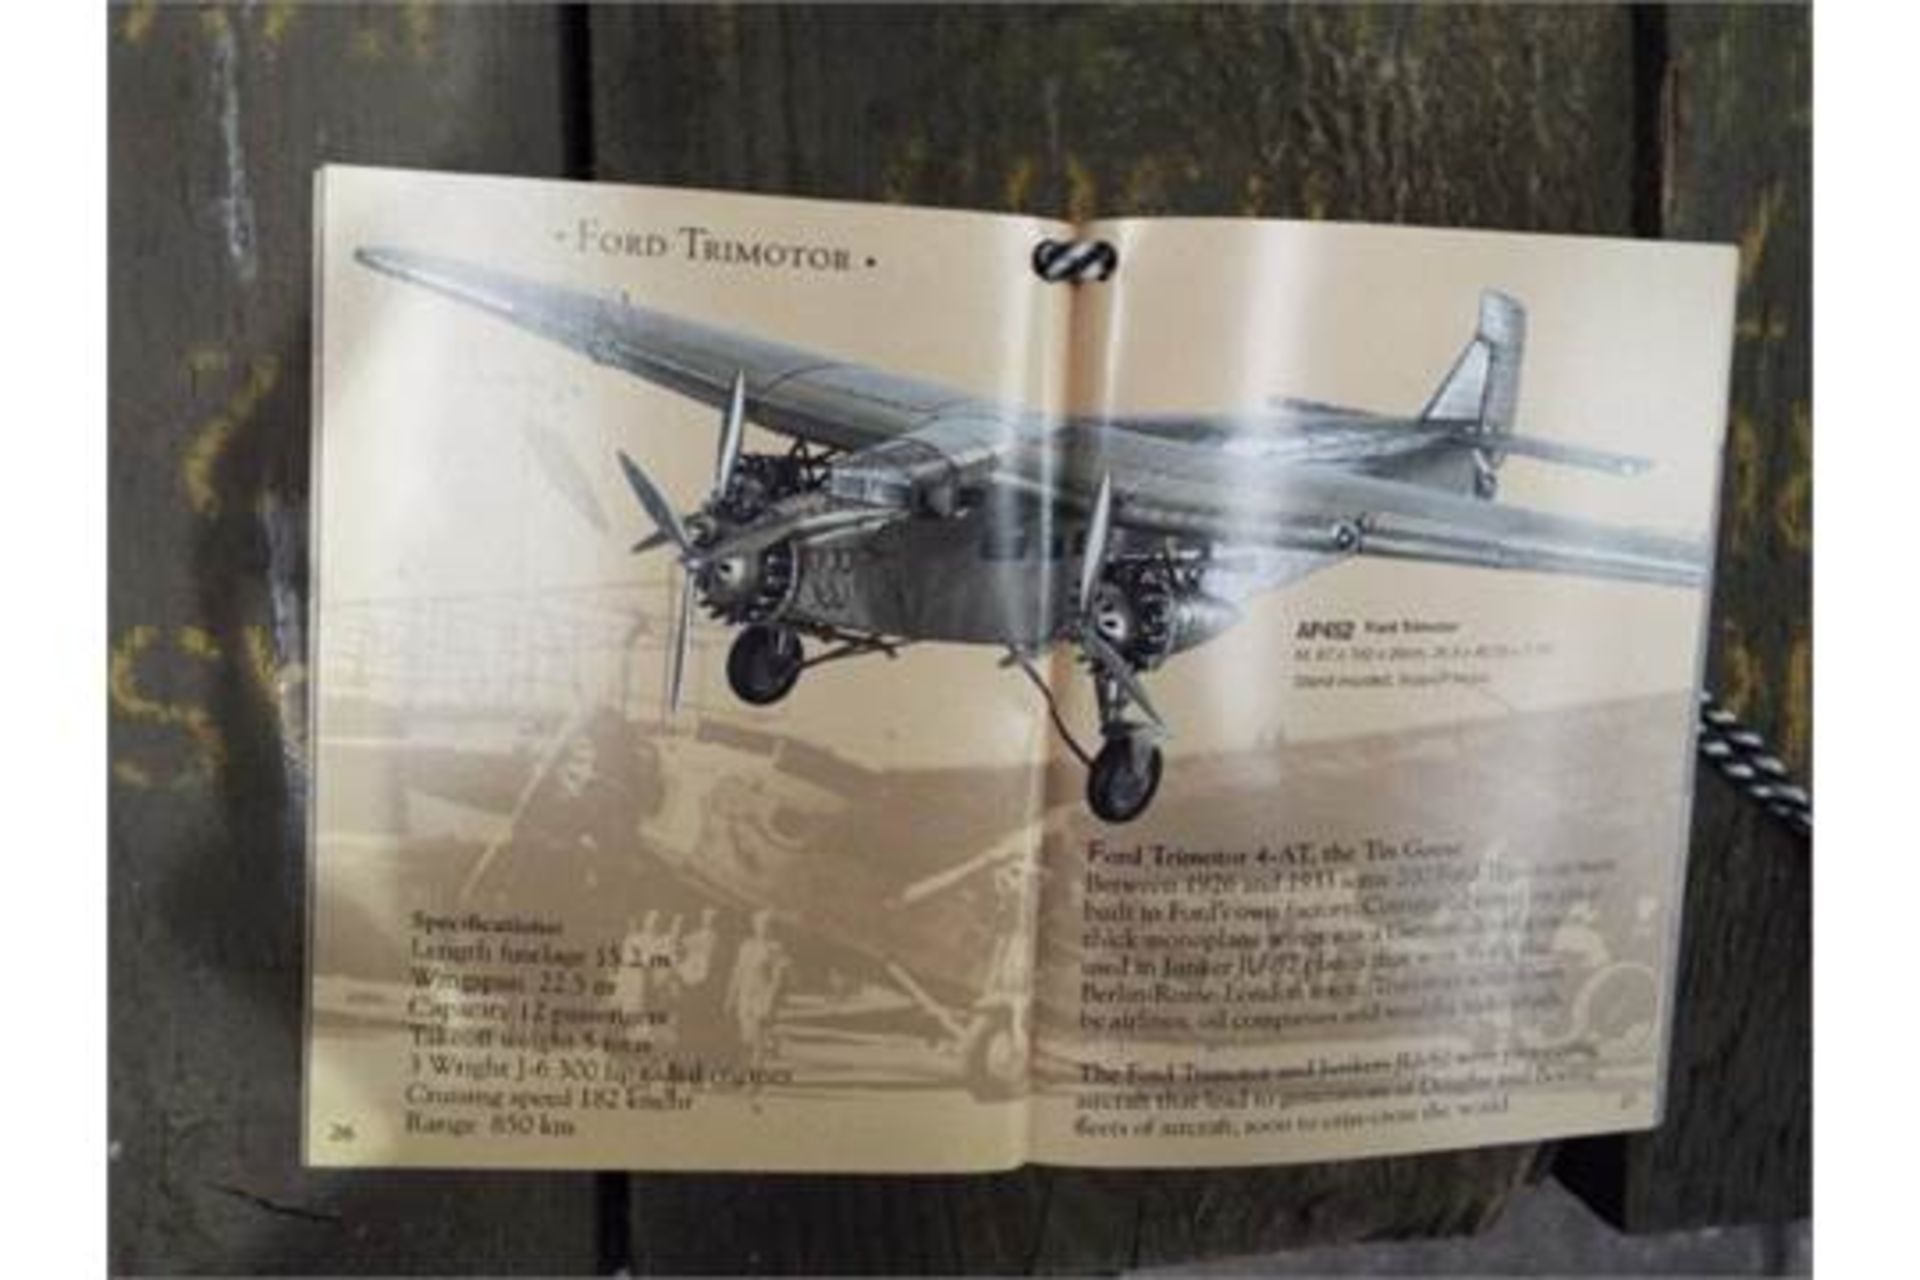 Ford Trimotor 4-AT "The Tin Goose" Aluminium Scale Model - Image 9 of 9